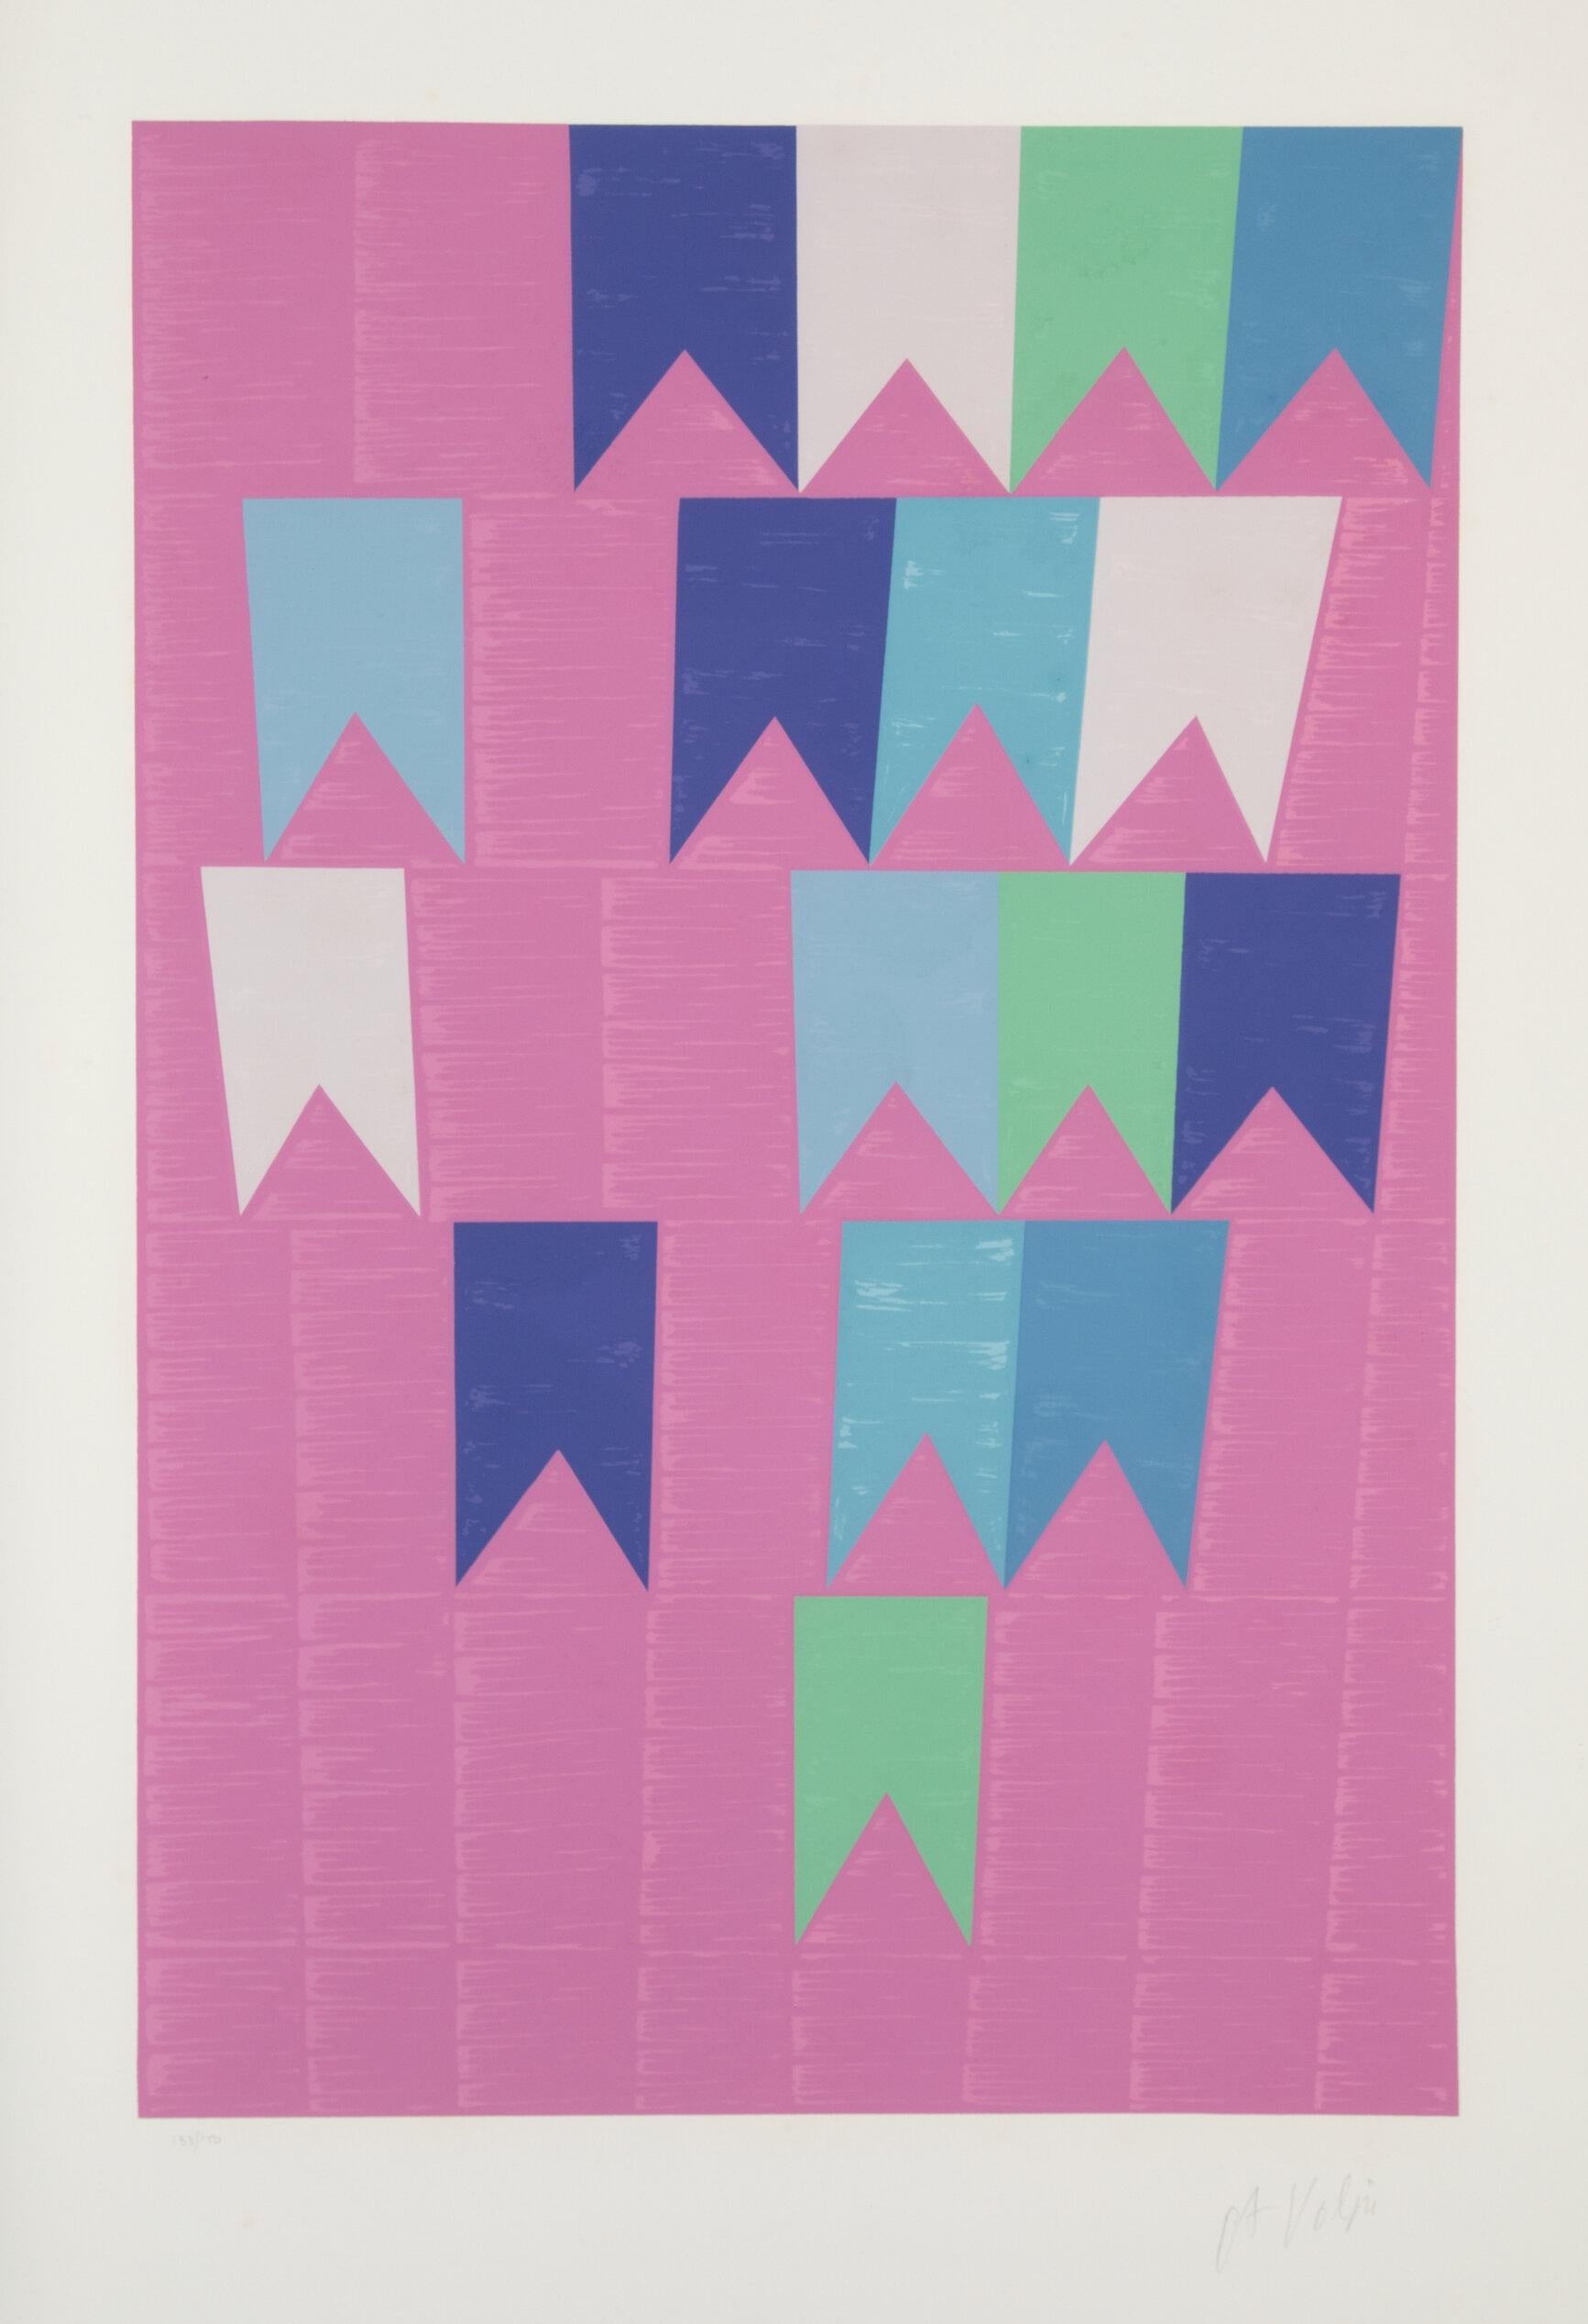 Artist: Alfredo Volpi, Brazilian (1896 - 1988)
Title: Bandeirinhas Pink
Year: circa 1970
Medium: Screenprint, signed and numbered in pencil
Edition: 133/150
Sheet Size: 38 x 26 in. (96.52 x 66.04 cm)
